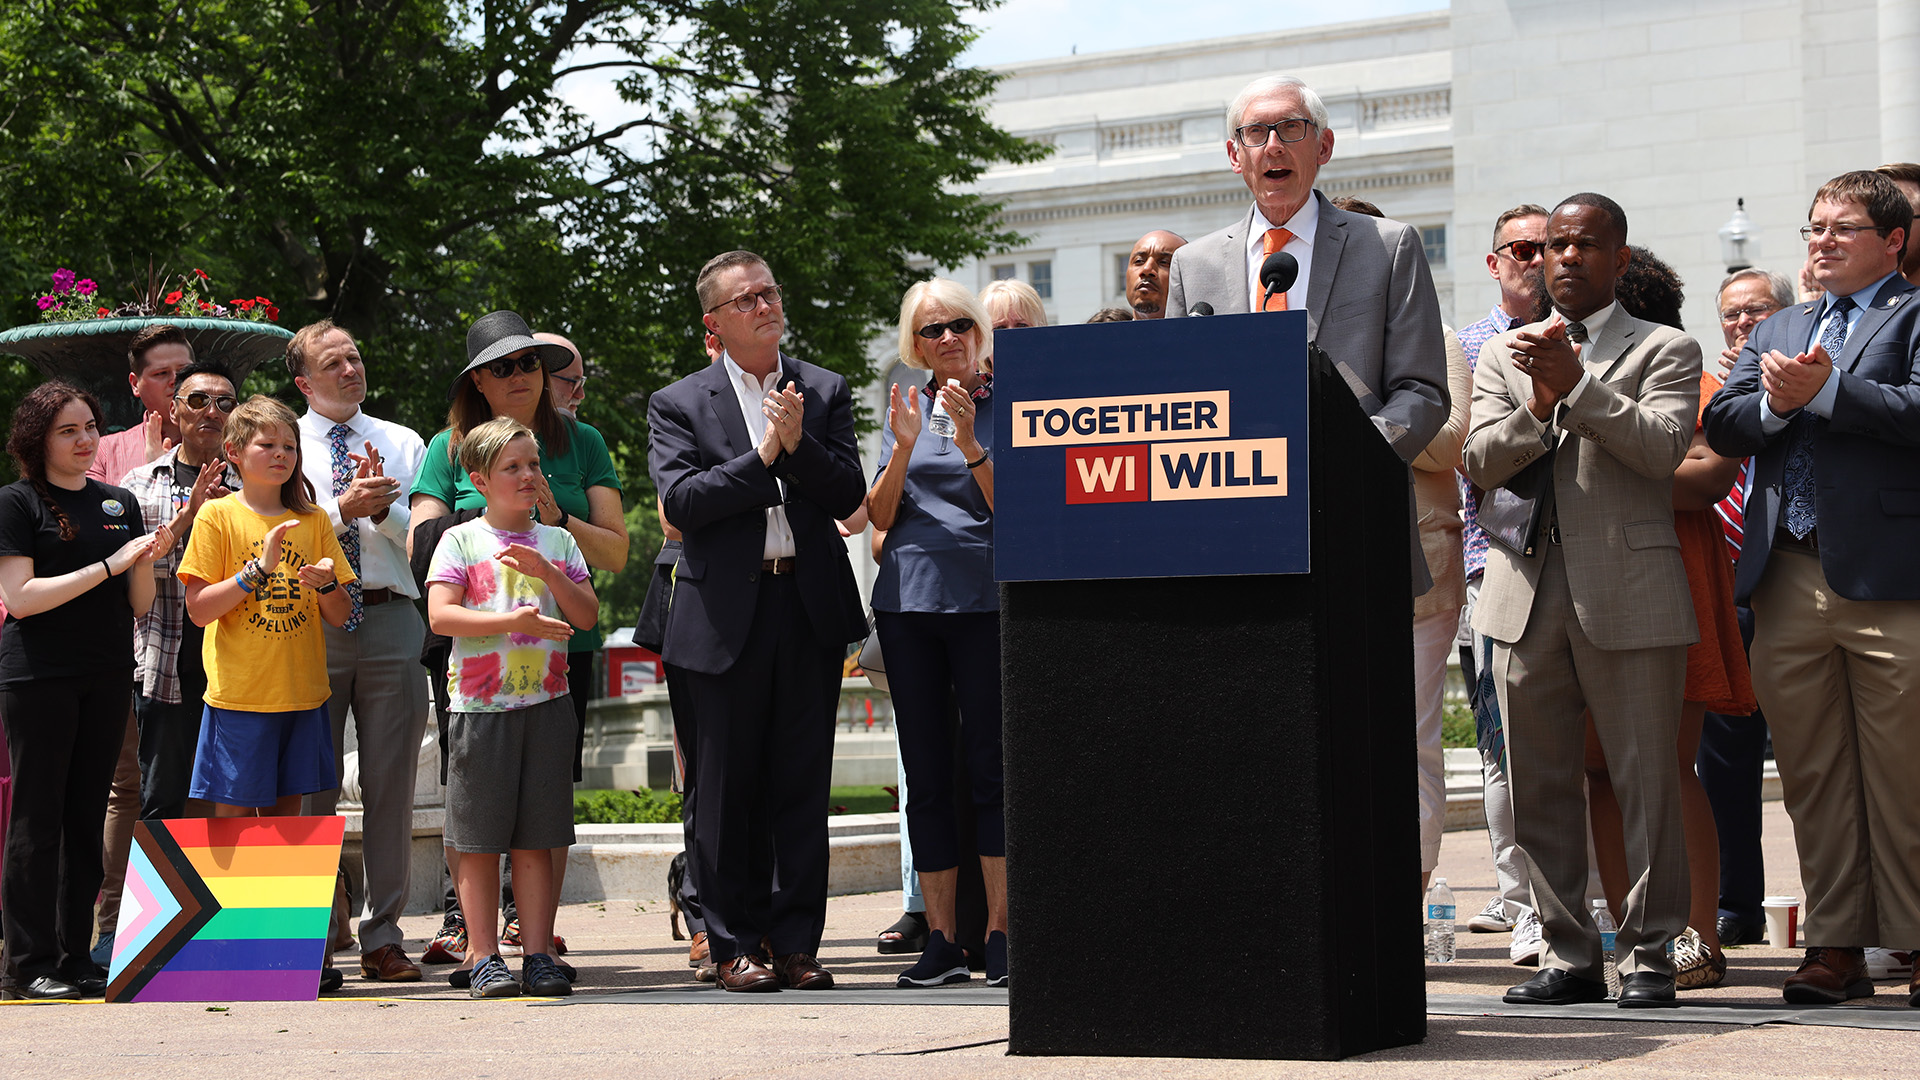 Tony Evers stands behind a cloth-draped podium affixed with a printed sign reading "Together WI Will" and speaks into a microphone as other people standing behind him clap their hands, with a marble masonry building and a tree in the background.